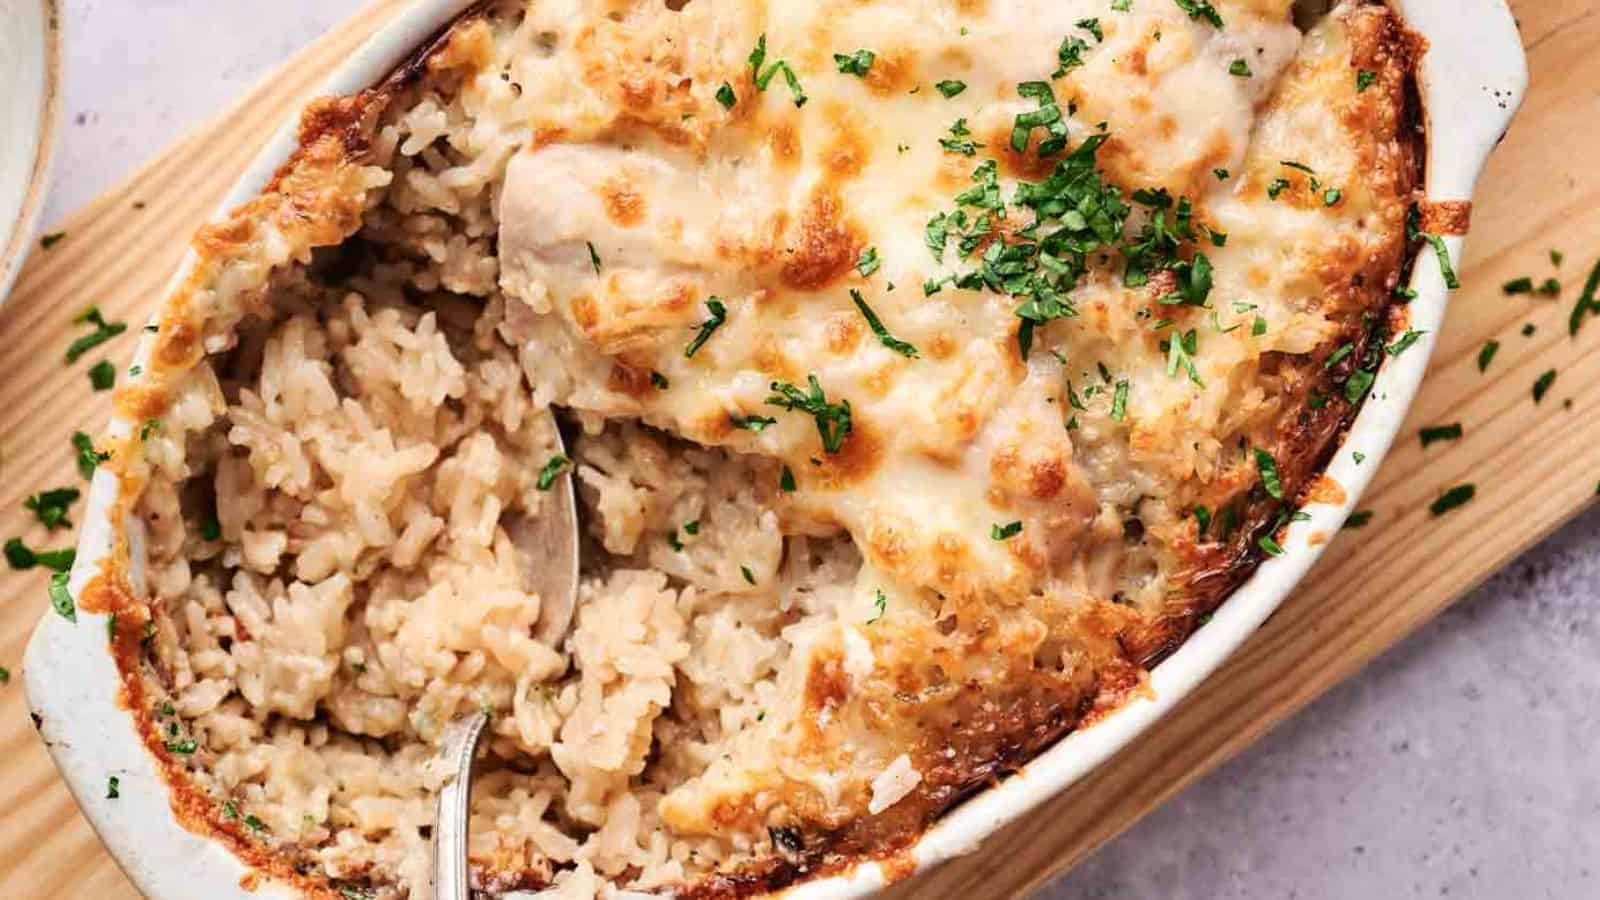 <p>Sometimes, all you need is a one-pot wonder, and Chicken and Rice Casserole is just that. This dish is a wholesome, comforting meal ideal for busy weeknights or lazy weekends.<br><strong>Get the Recipe: </strong><a href="https://www.pocketfriendlyrecipes.com/chicken-and-rice-casserole/?utm_source=msn&utm_medium=page&utm_campaign=msn">Chicken and Rice Casserole</a></p>